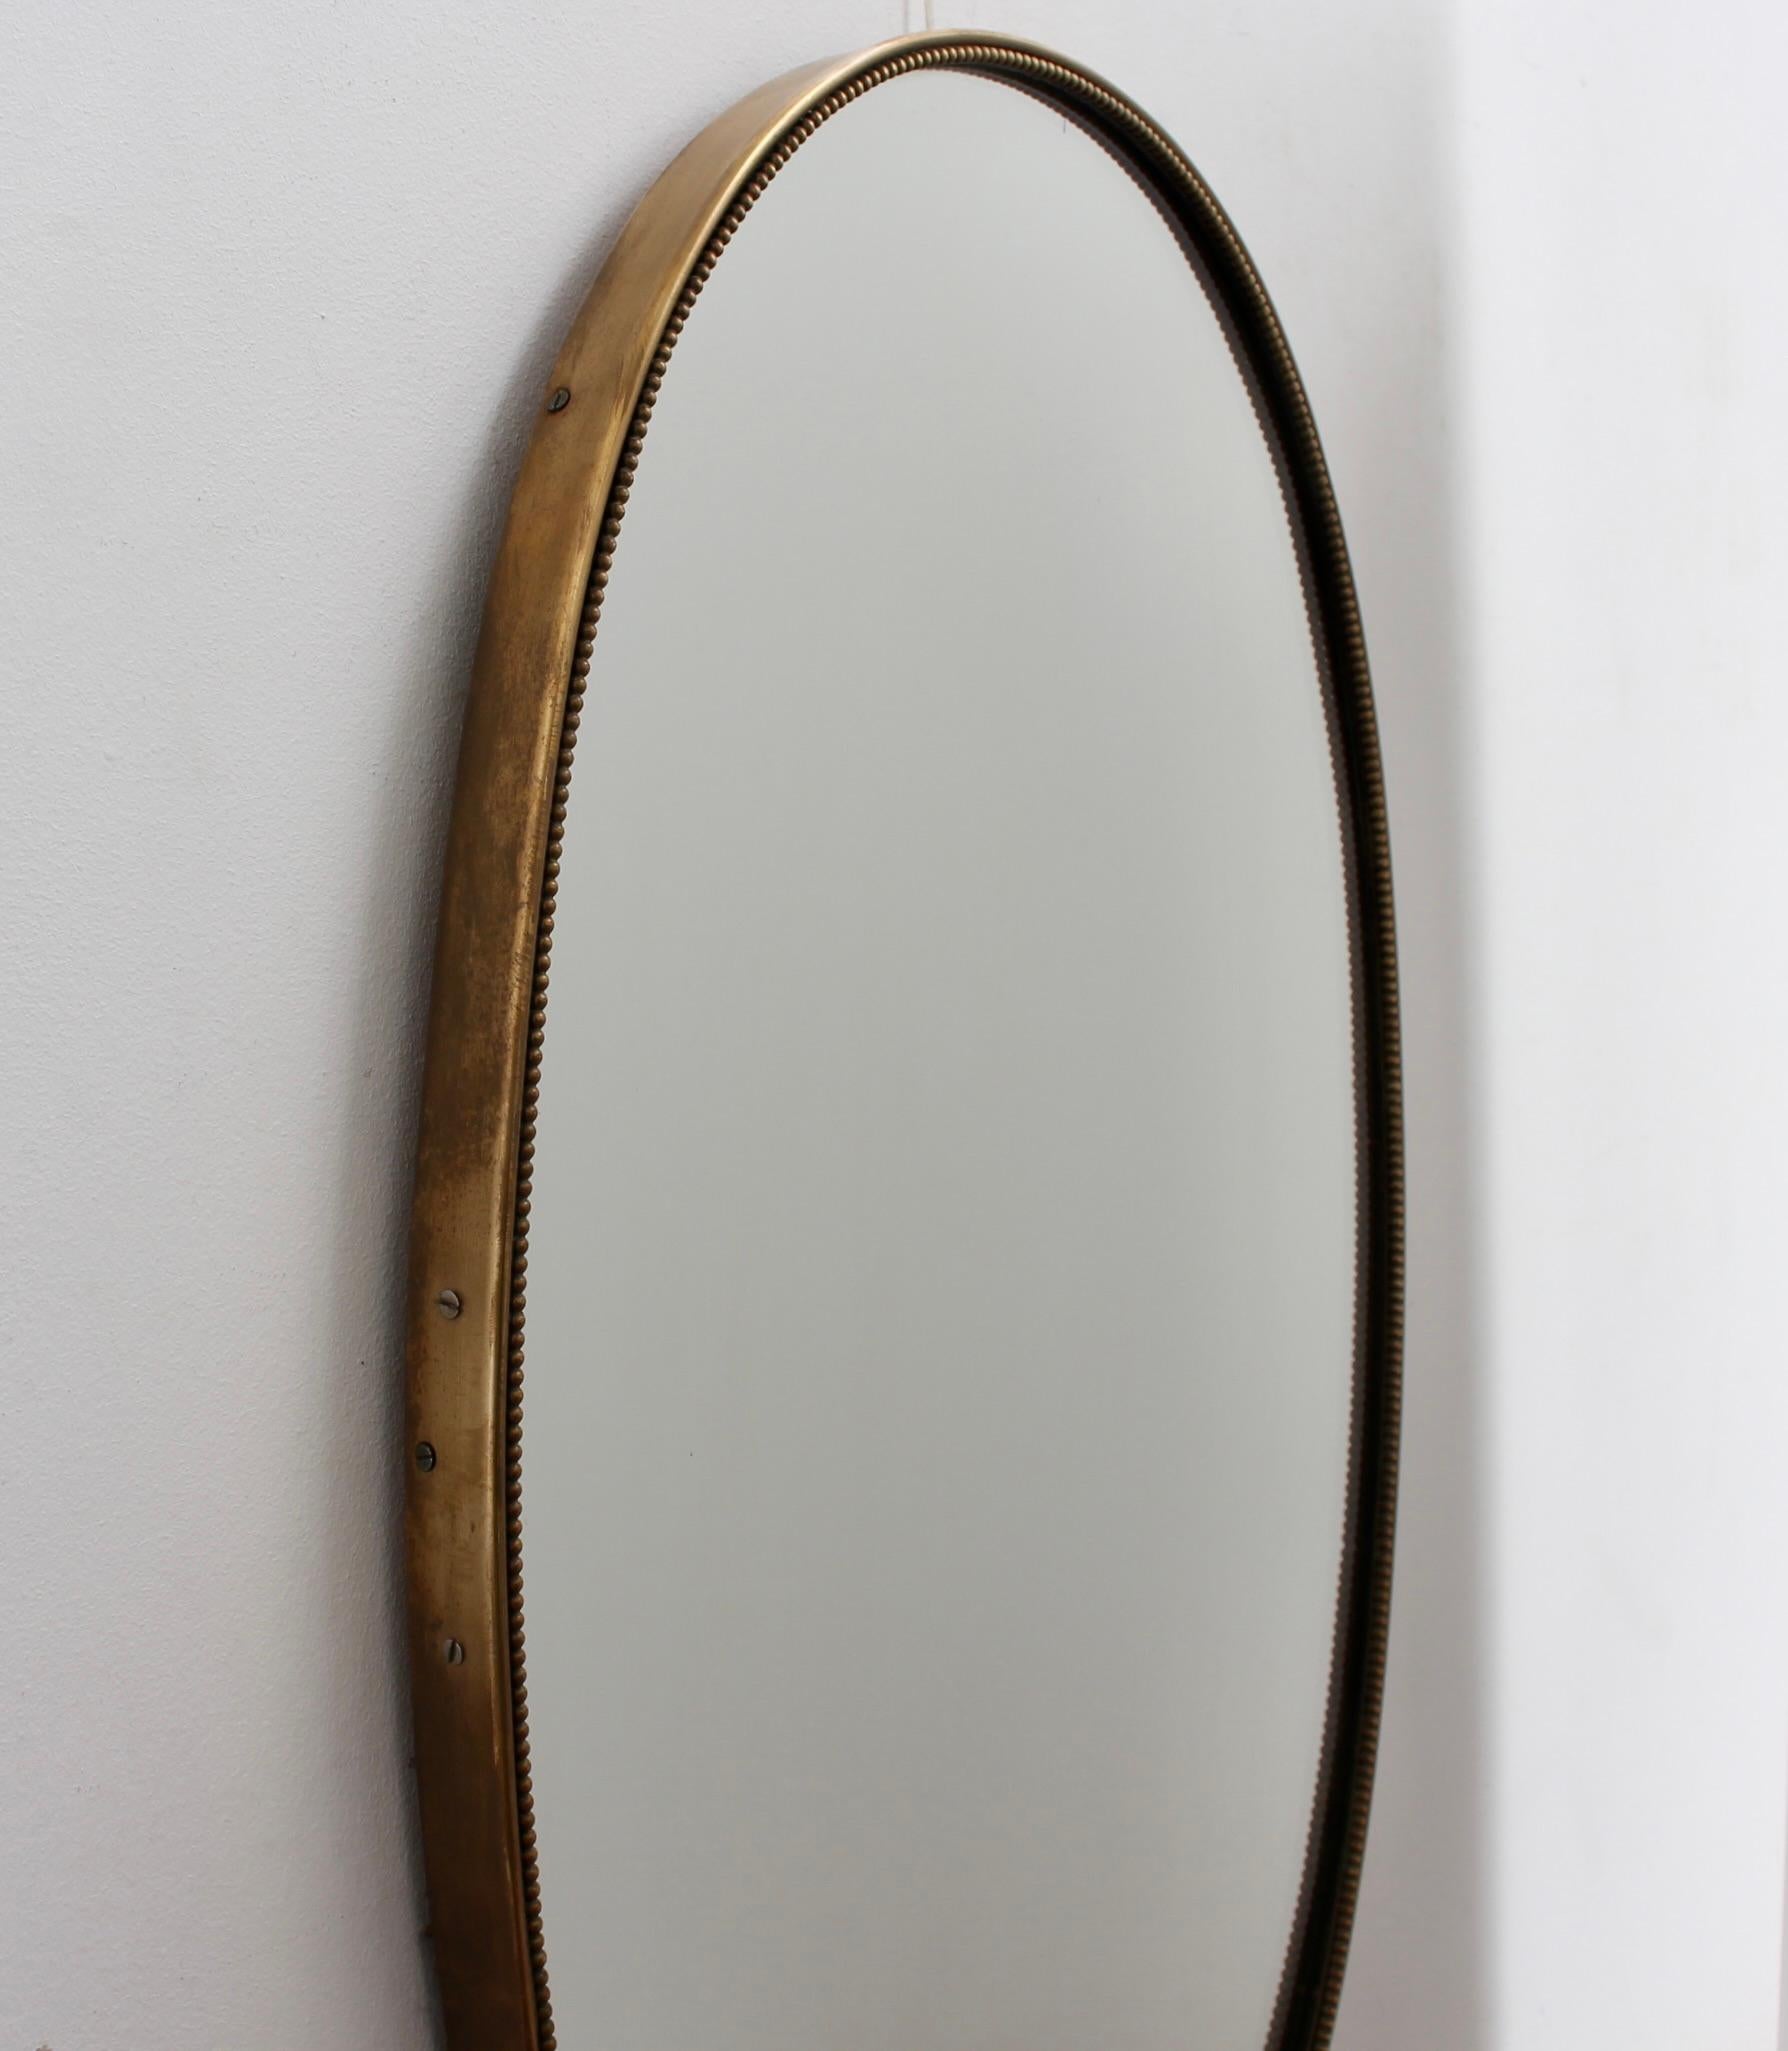 Mid-20th Century Vintage Italian Oval Wall Mirror with Brass Frame and Beading (circa 1950s) For Sale